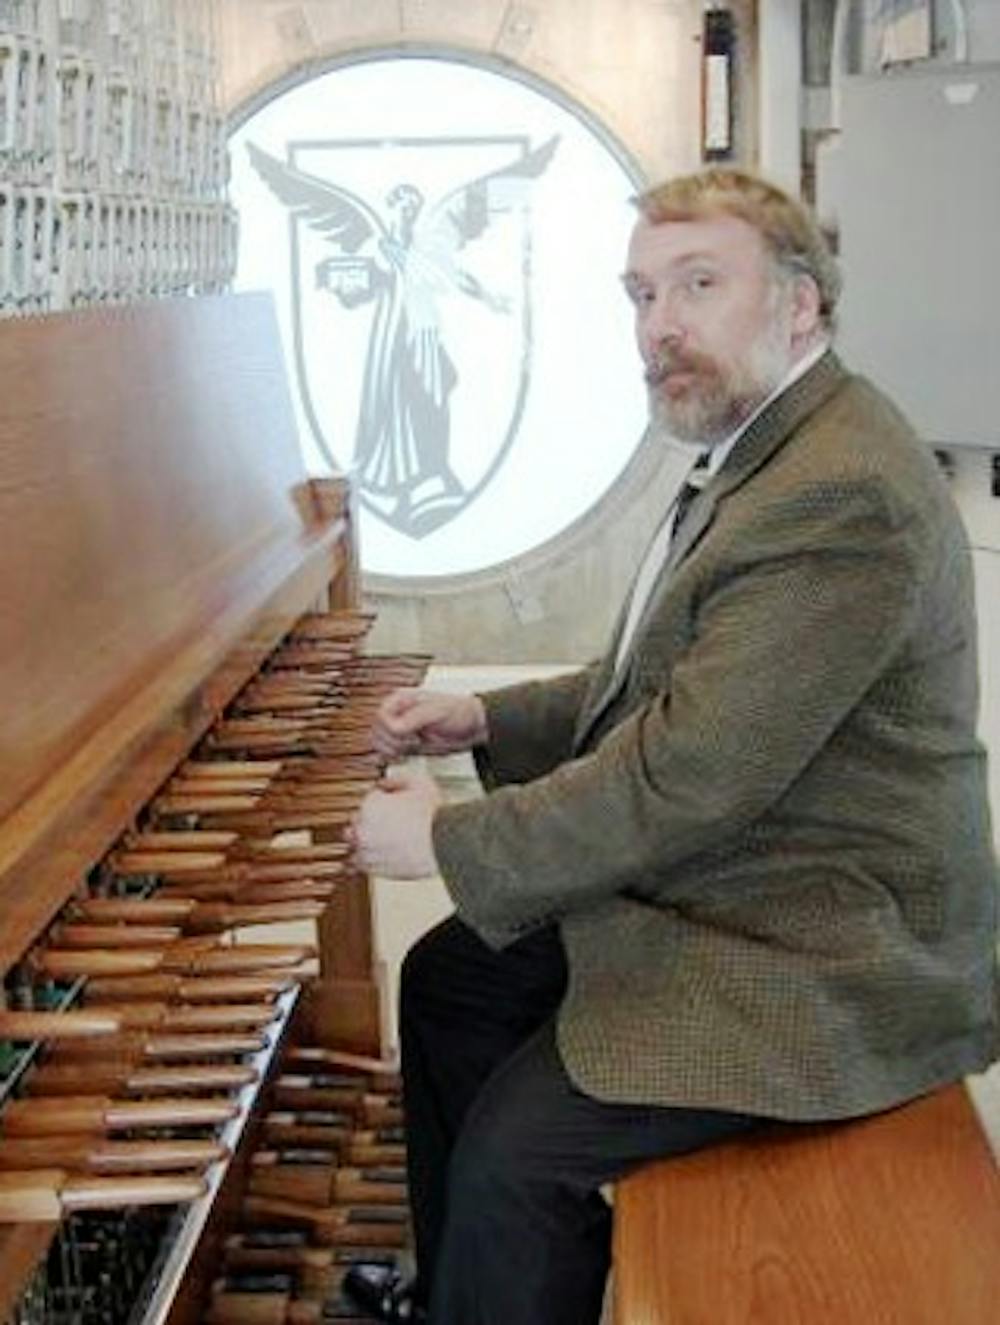 <p>John Gouwens, an organist and carillonneur, will perform a free bell tower show in Shafer Tower Saturday for Family Weekend. After the performance, he will take small groups on tours of the bell tower. <em style="background-color: initial;">John Gouwens // Photo Provided</em></p>